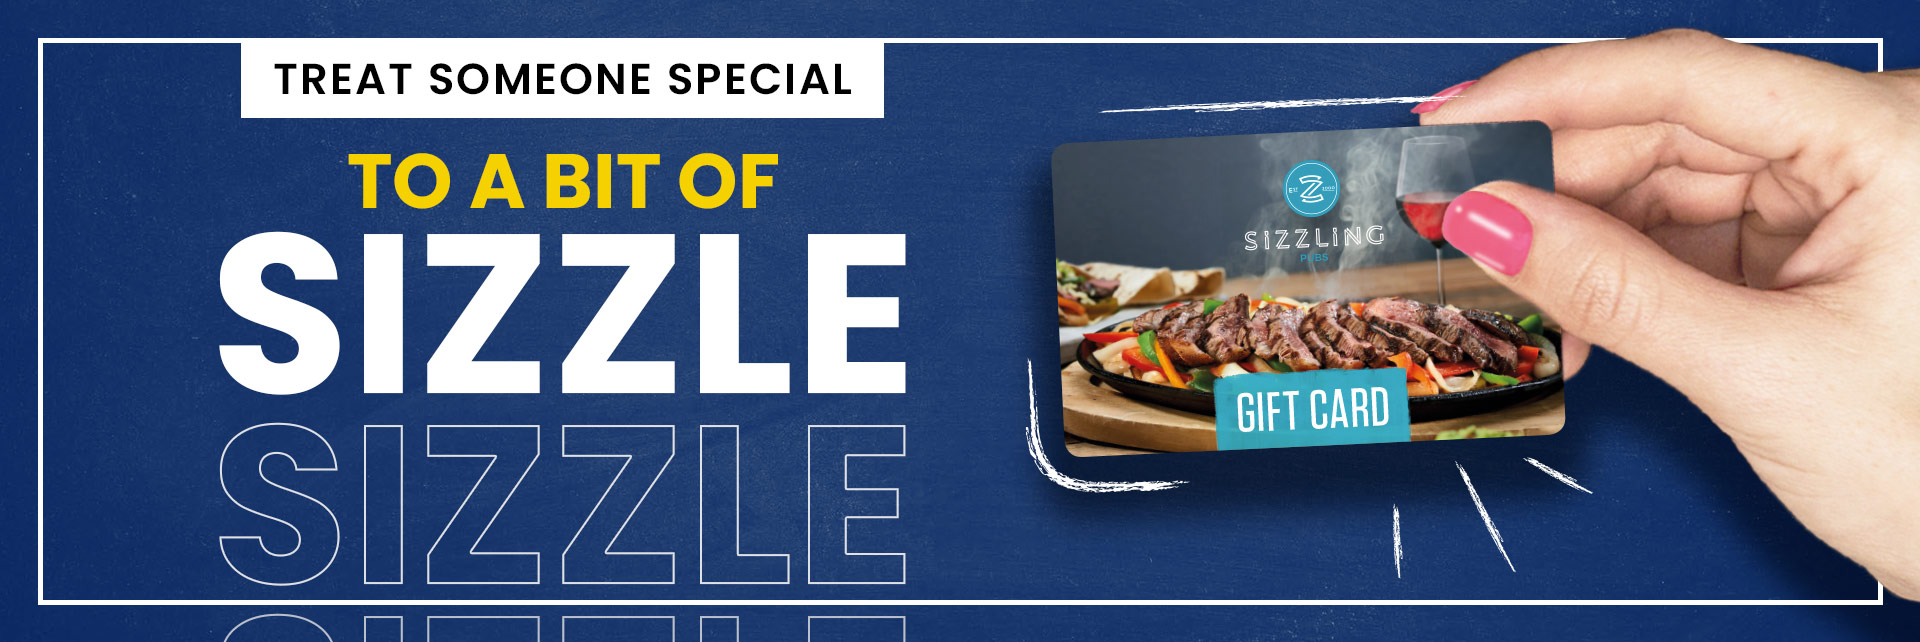 Sizzling Pubs Gift Card at The Sutton Park Hotel in Sutton Coldfield